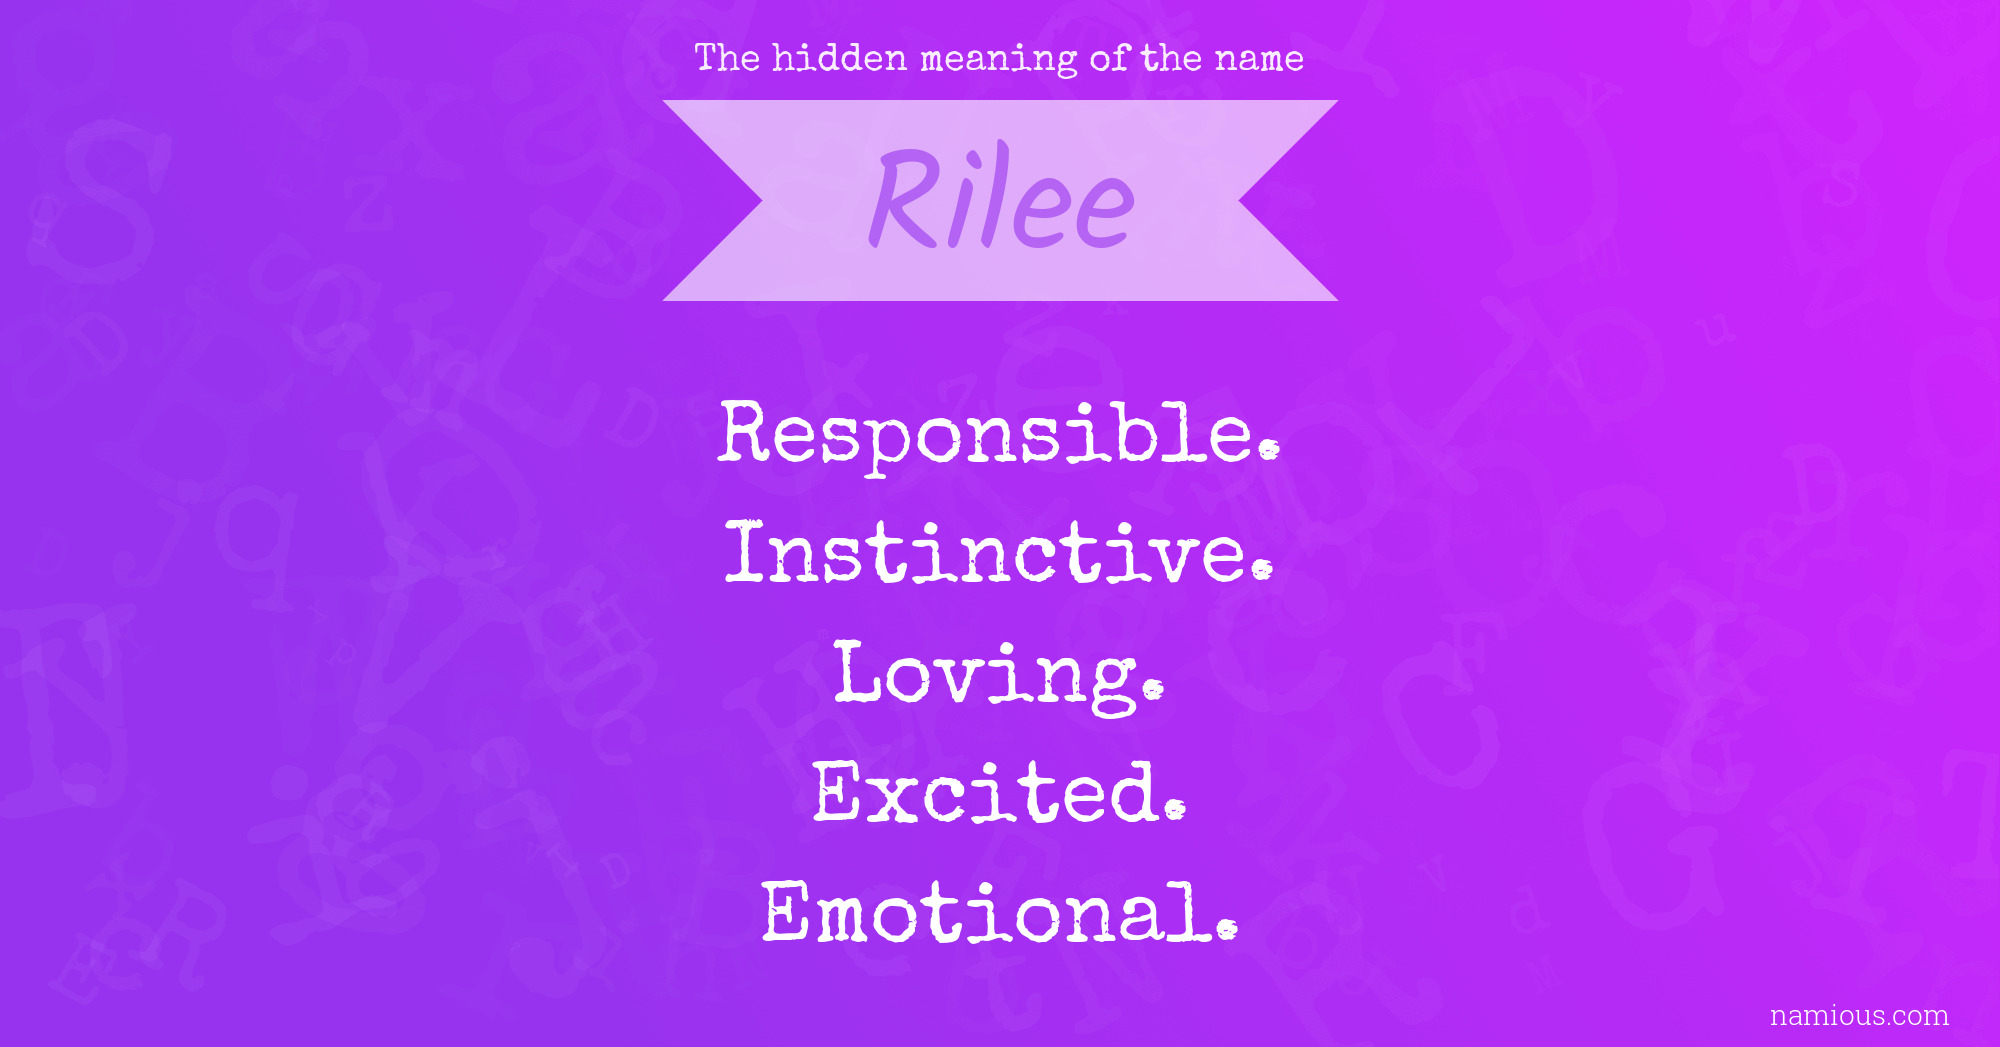 The hidden meaning of the name Rilee